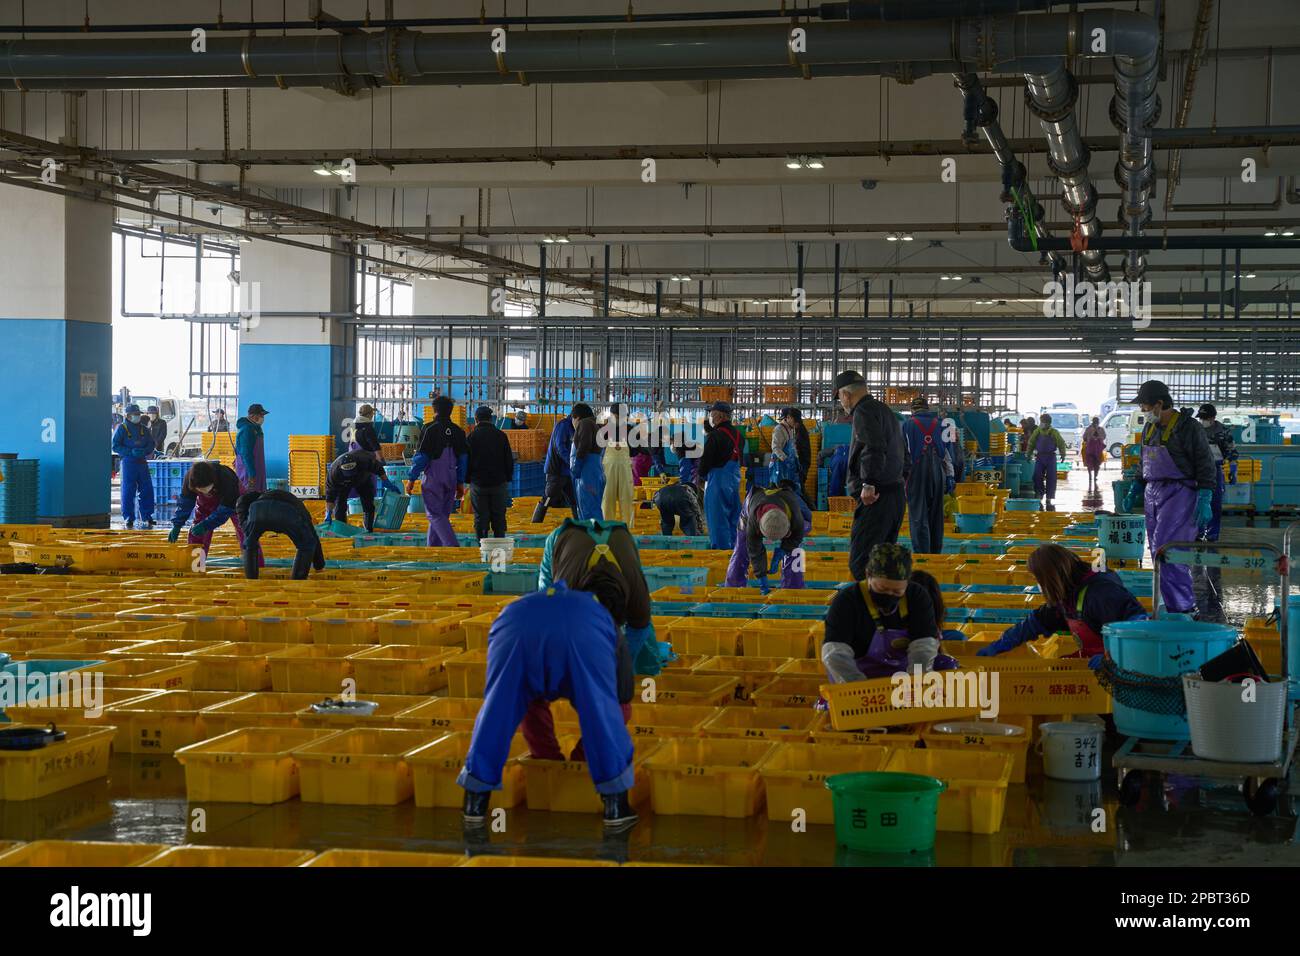 (230313) -- FUKUSHIMA, March 13, 2023 (Xinhua) -- This photo taken on March 8, 2023 shows a fish market in Soma City, Fukushima Prefecture, Japan. Struck by a magnitude-9.0 earthquake and ensuing tsunami that hit Japan's northeast on March 11, 2011, the power plant suffered core meltdowns, resulting in a level-7 nuclear accident, the highest on the International Nuclear and Radiological Event Scale. Twelve years after the 2011 accident traumatized Fukushima's fishing industry, local fishermen are still struggling for recovery. As Japan pushes ahead with dumping tons of contaminated nuclear Stock Photo